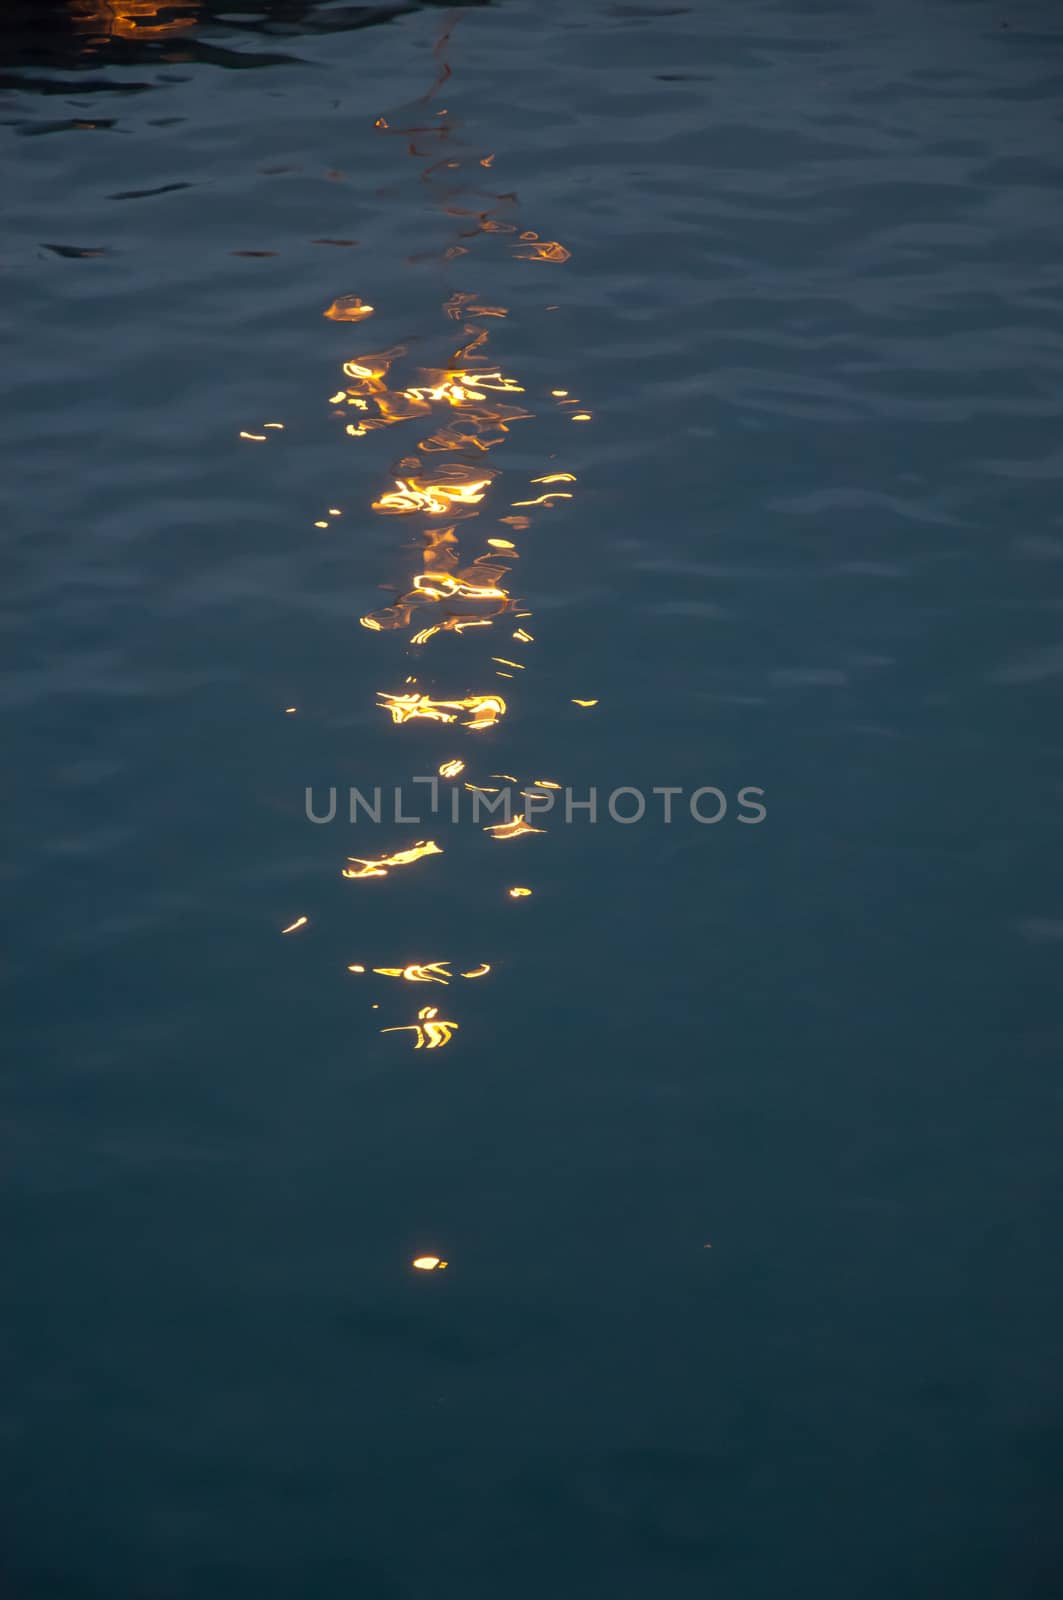 Artificial light reflected in the water. by VictorSuarez